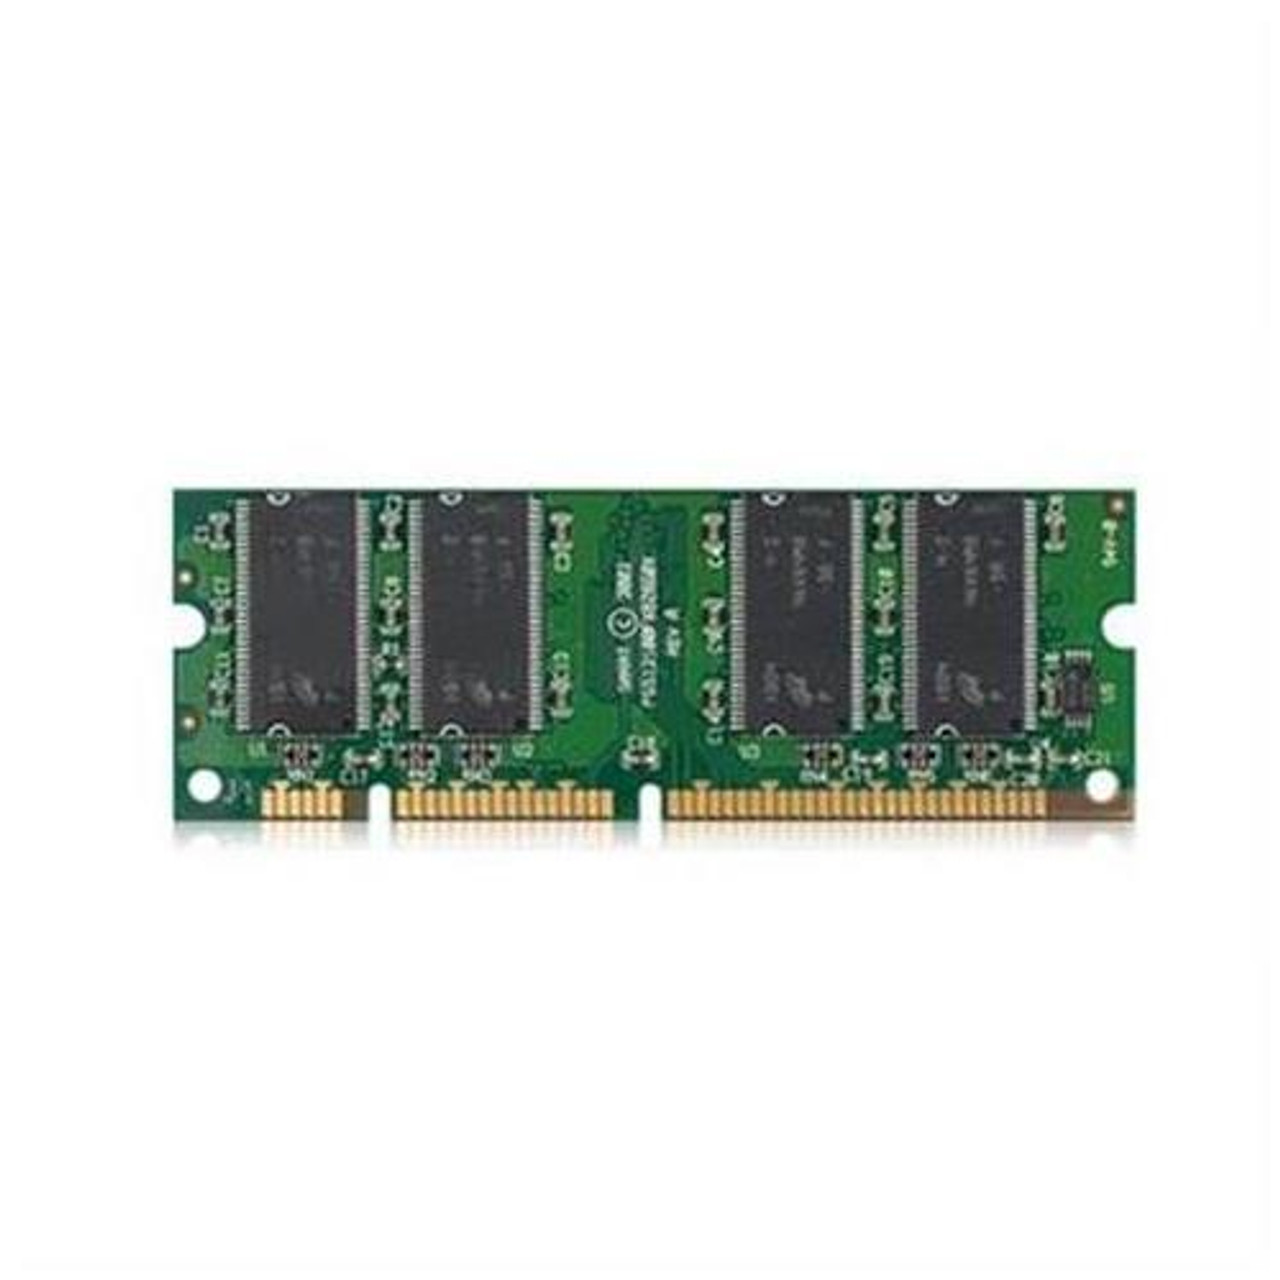 A0743429-OEM - Samsung 128MB PC2100 DDR-266MHz non-ECC Unbuffered CL2.5 100-Pin SoDimm Mermory Module for 2330d 2330dn and 2330dn (Refurbished)